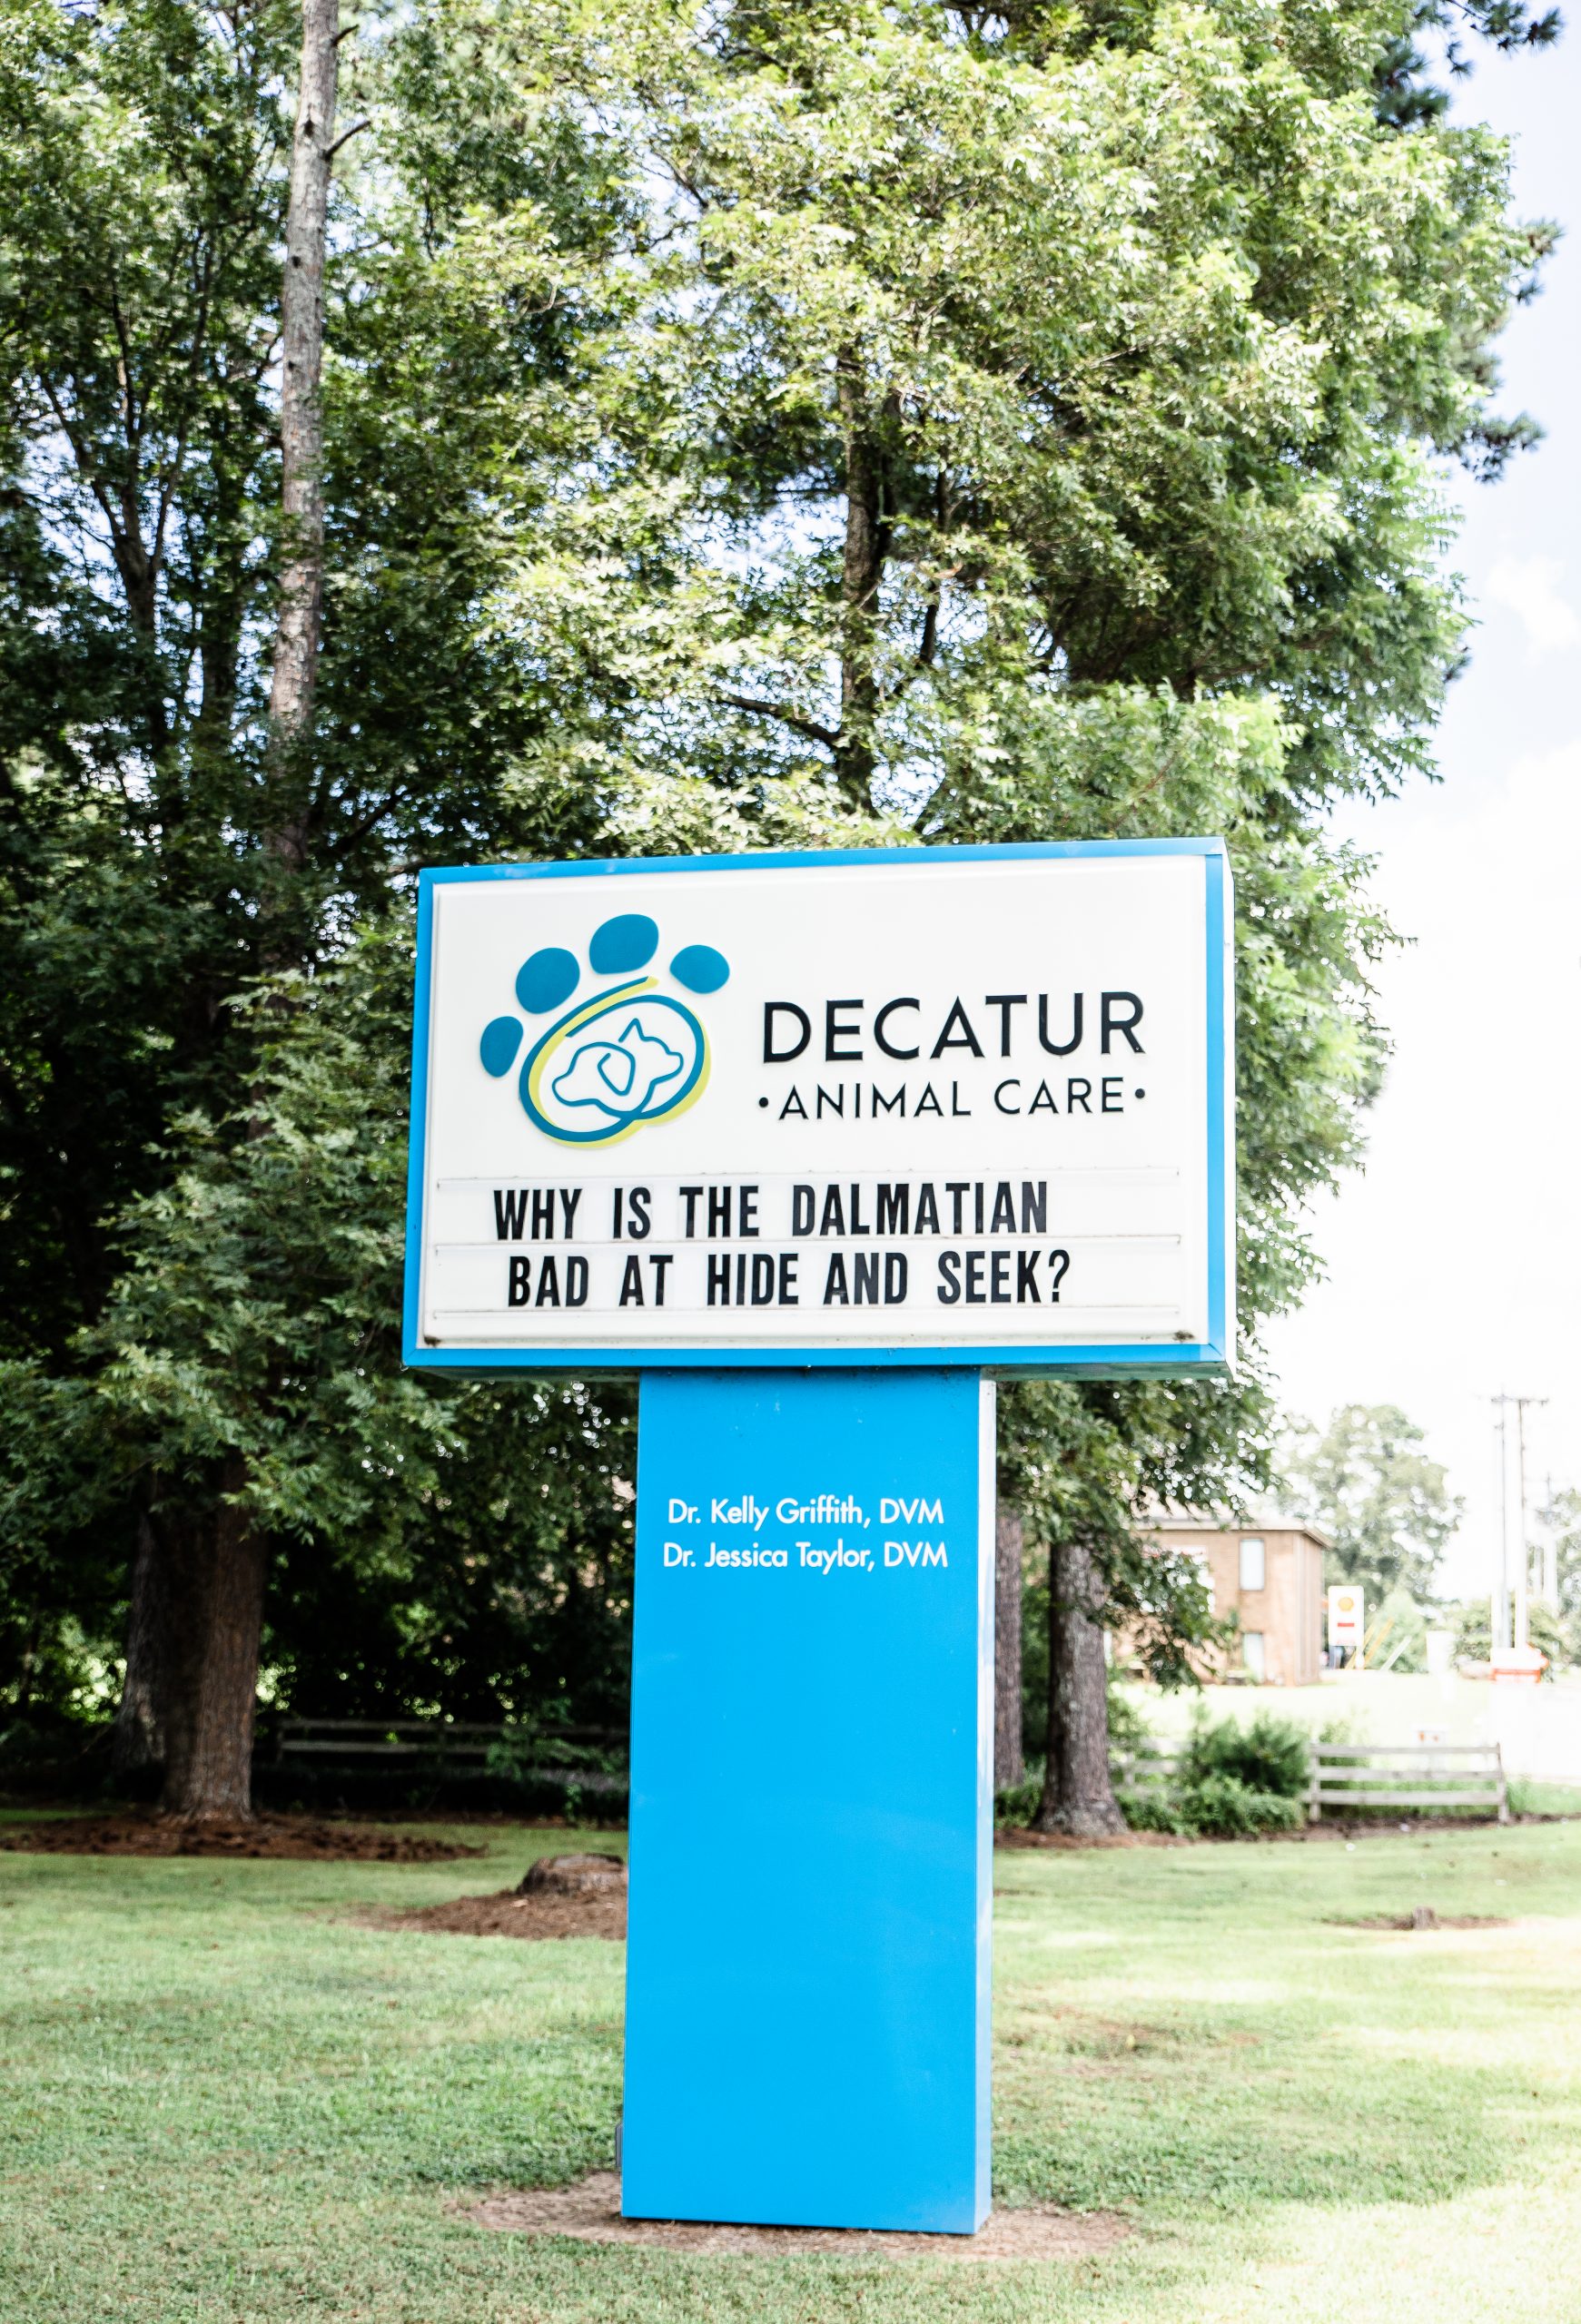 About | Decatur Animal Care